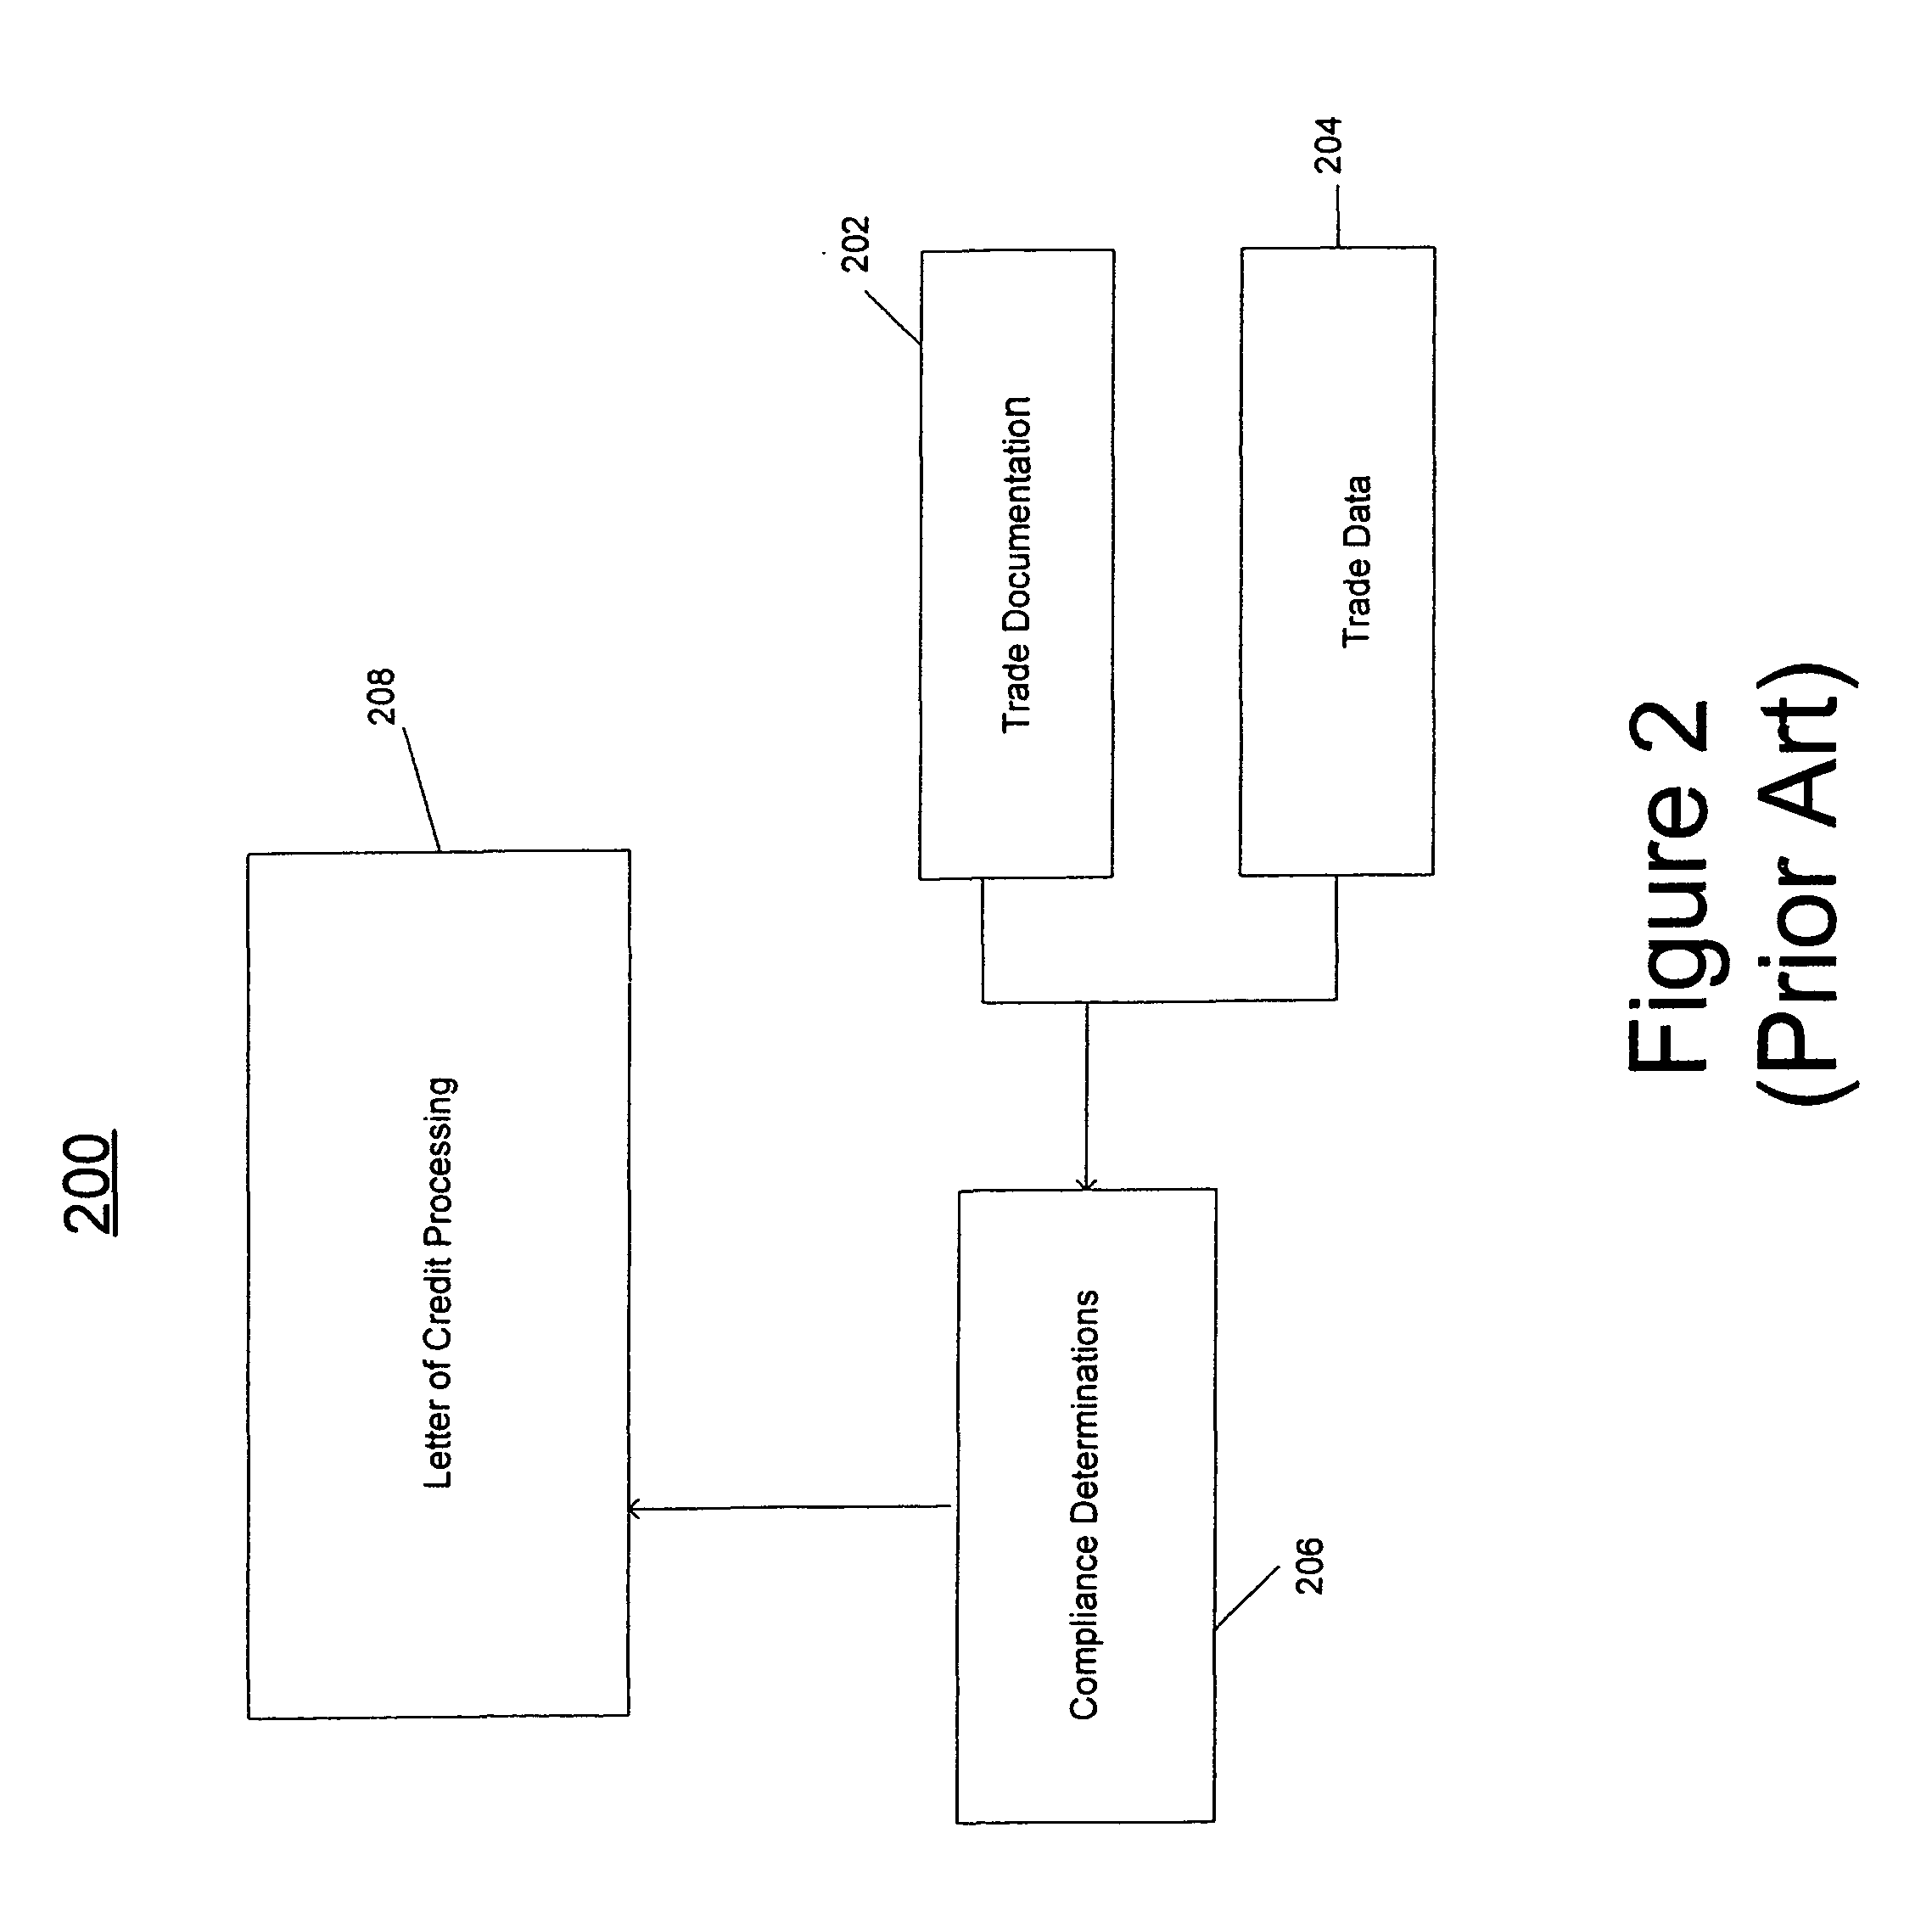 System and method for enhancing supply chain transactions